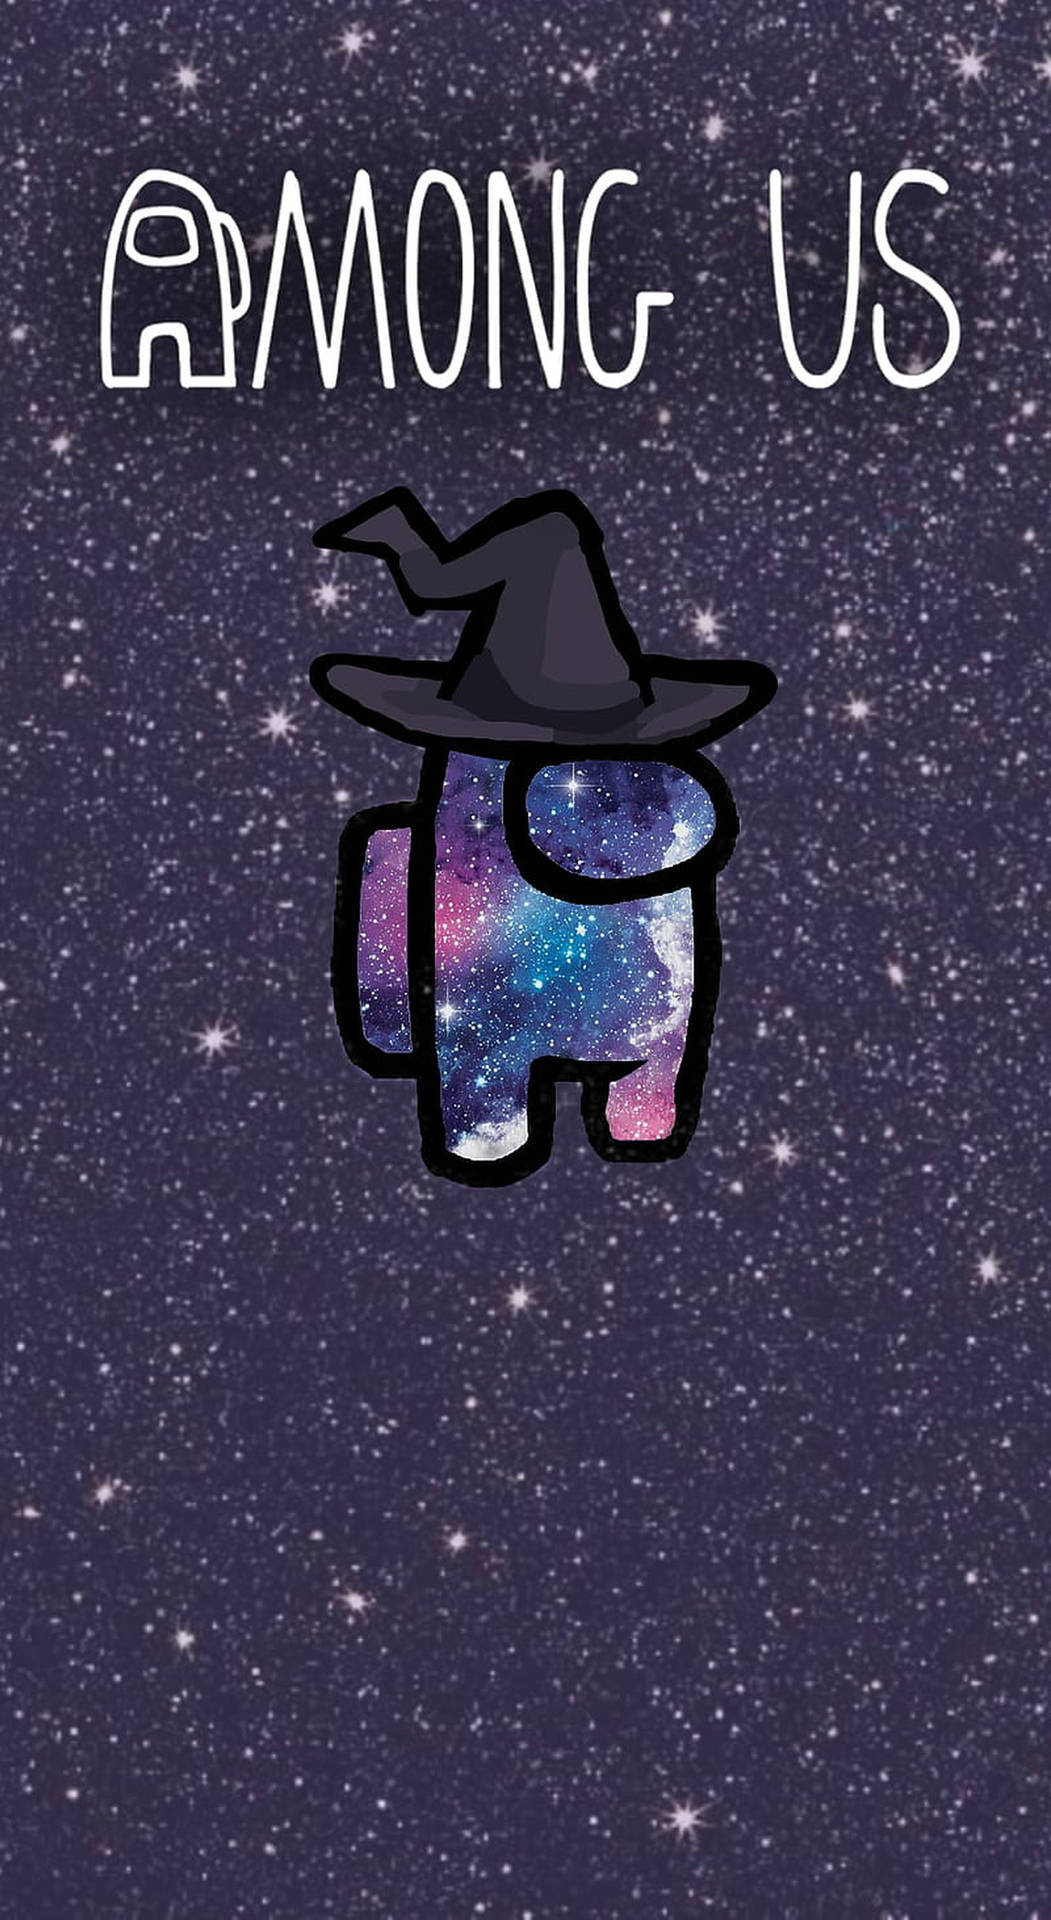 Witch Hat Among Us Space Wallpaper